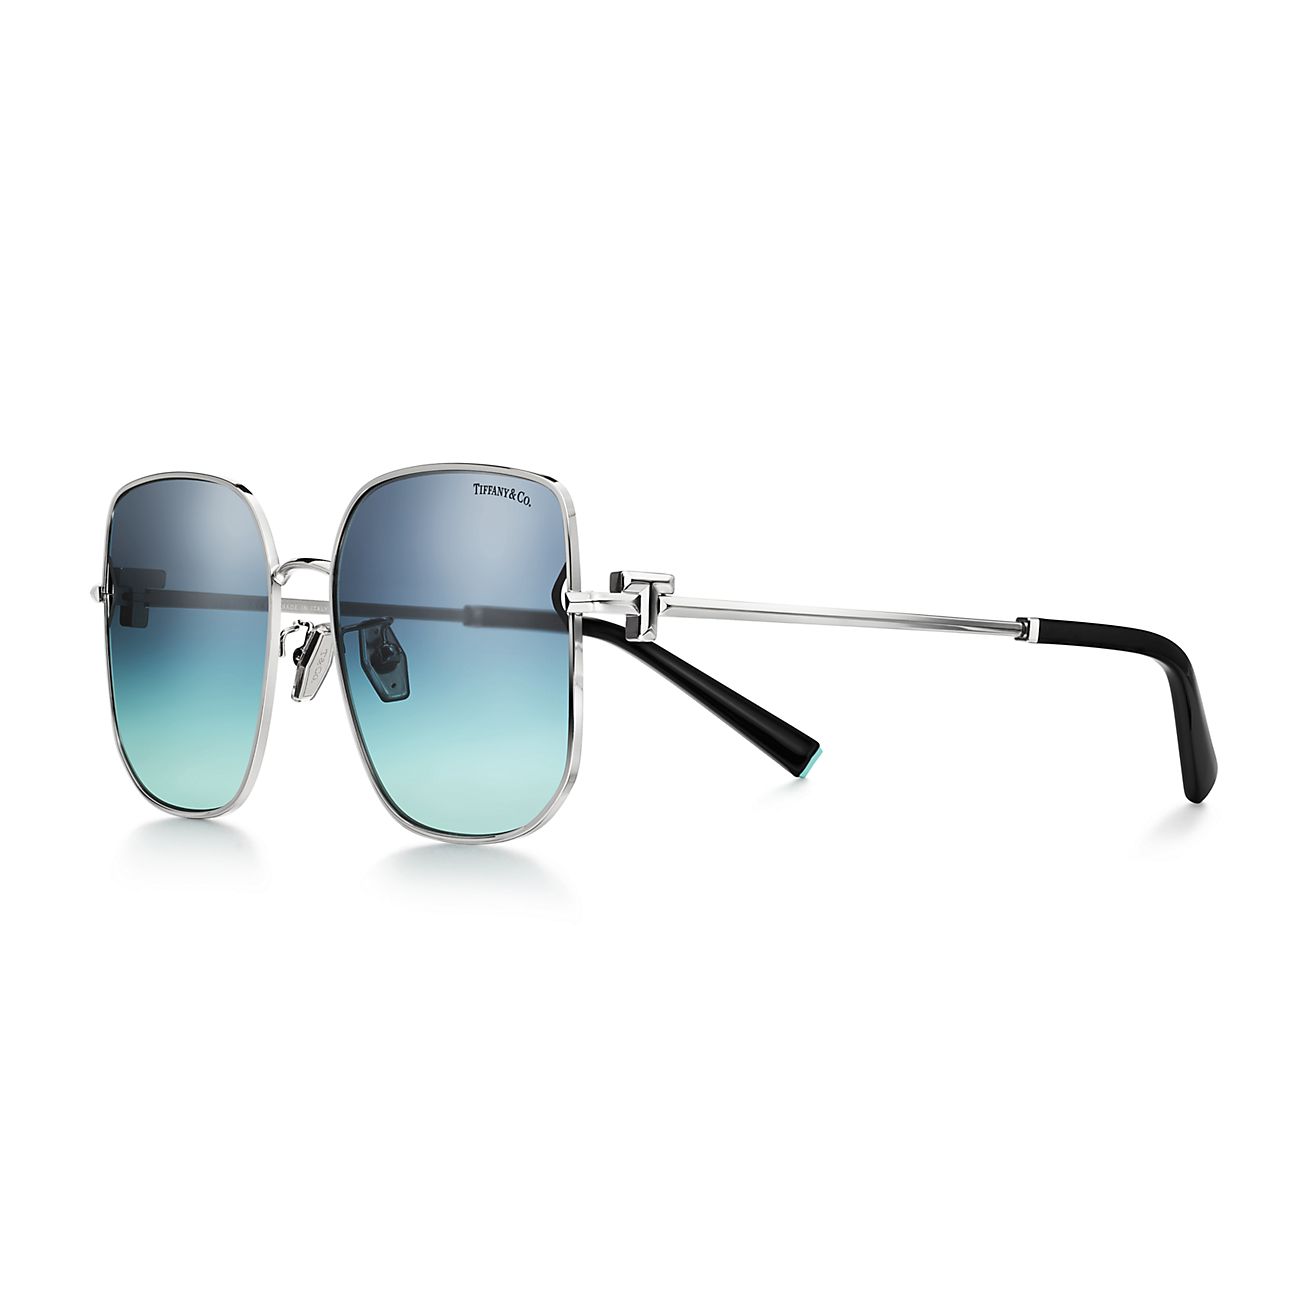 Tiffany T Sunglasses in Silver-colored Metal with Tiffany Blue 